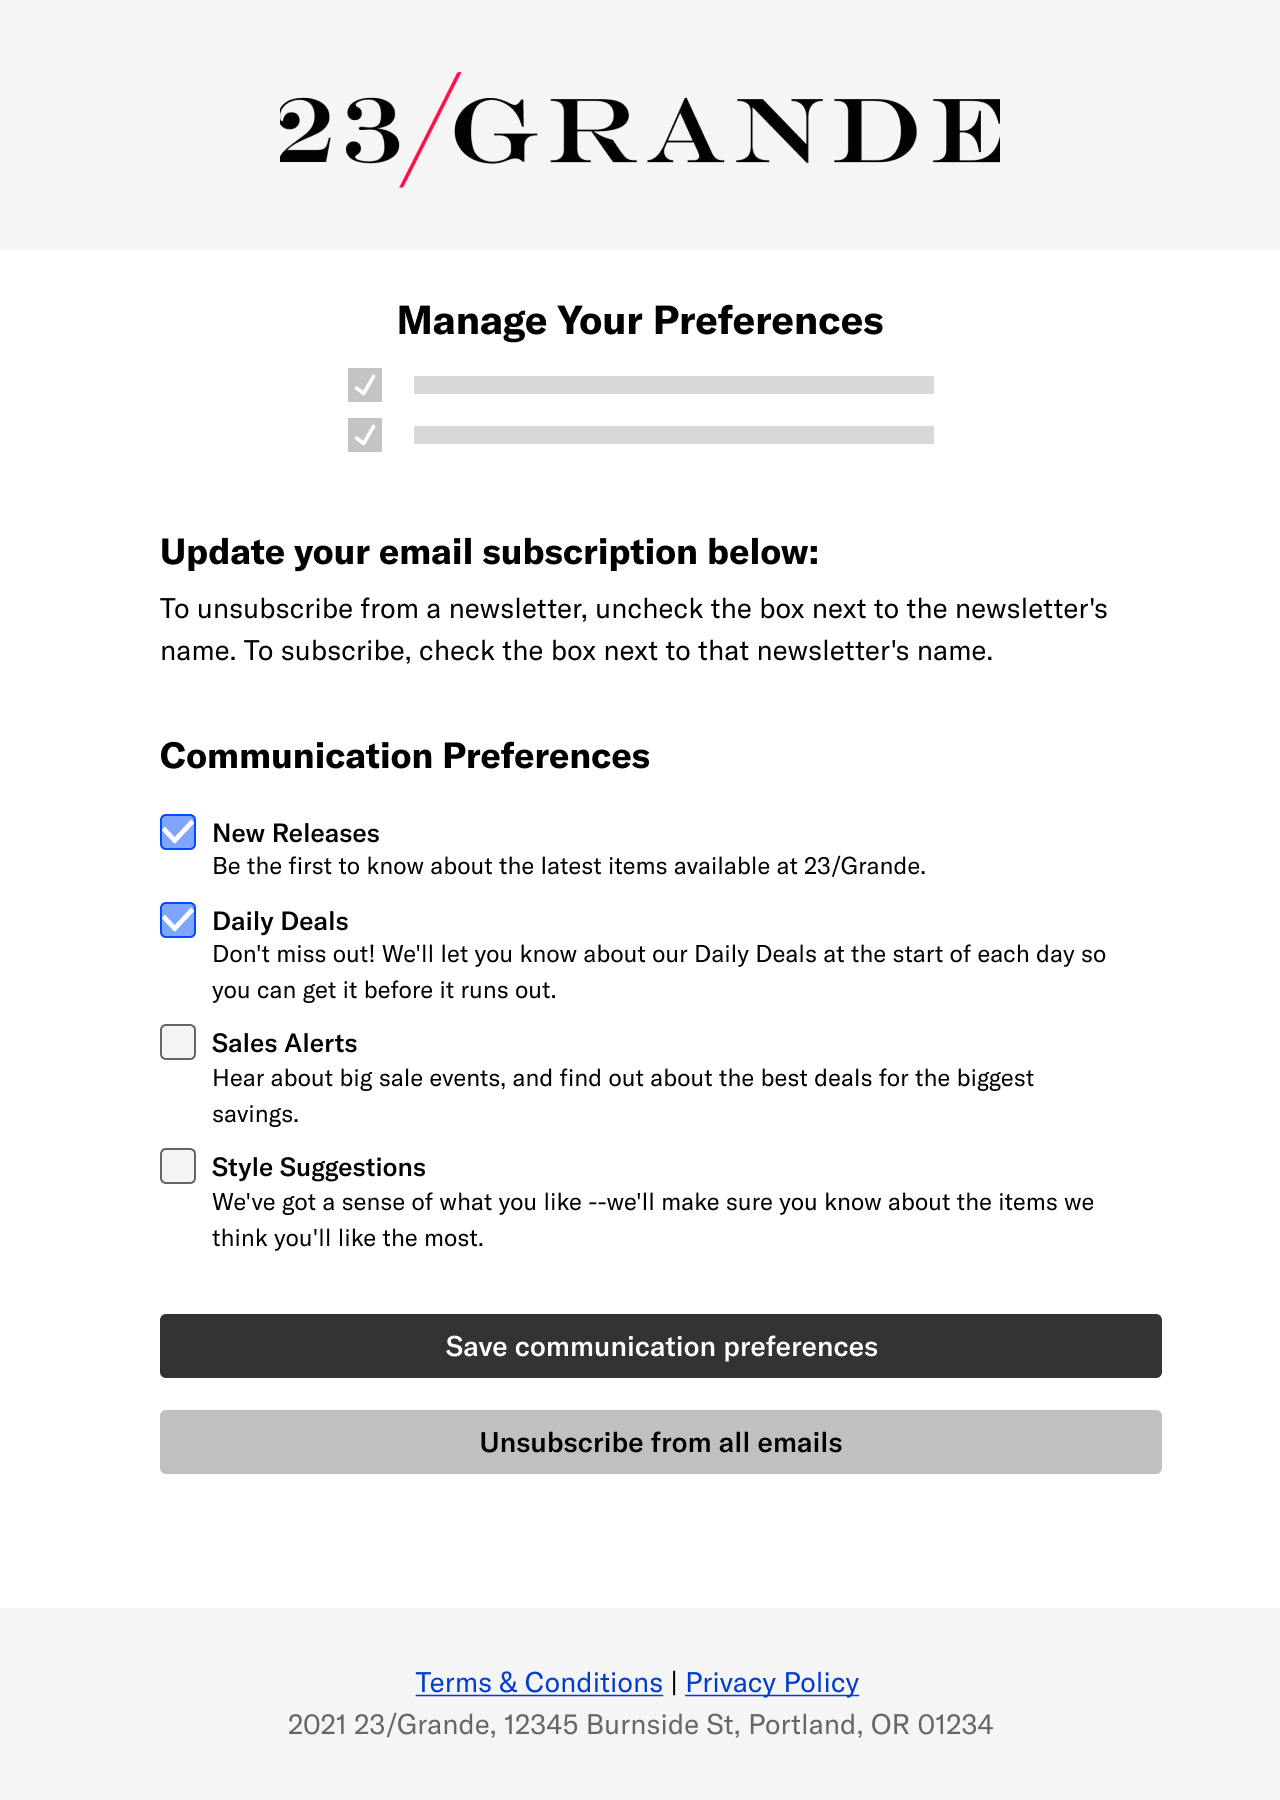 Email preference centers